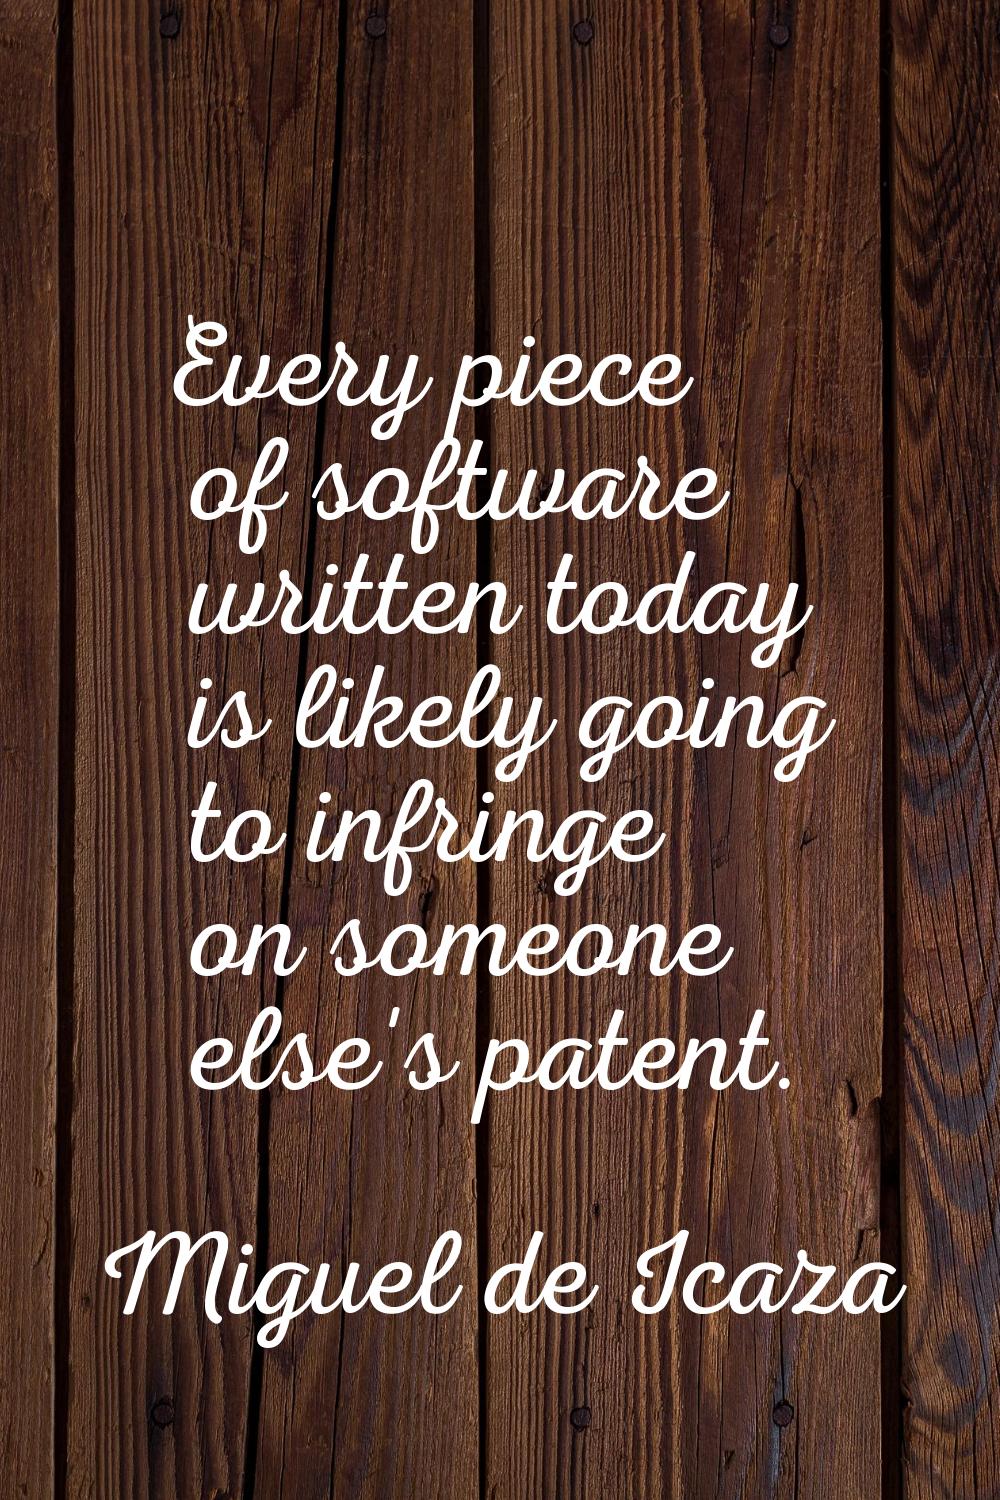 Every piece of software written today is likely going to infringe on someone else's patent.